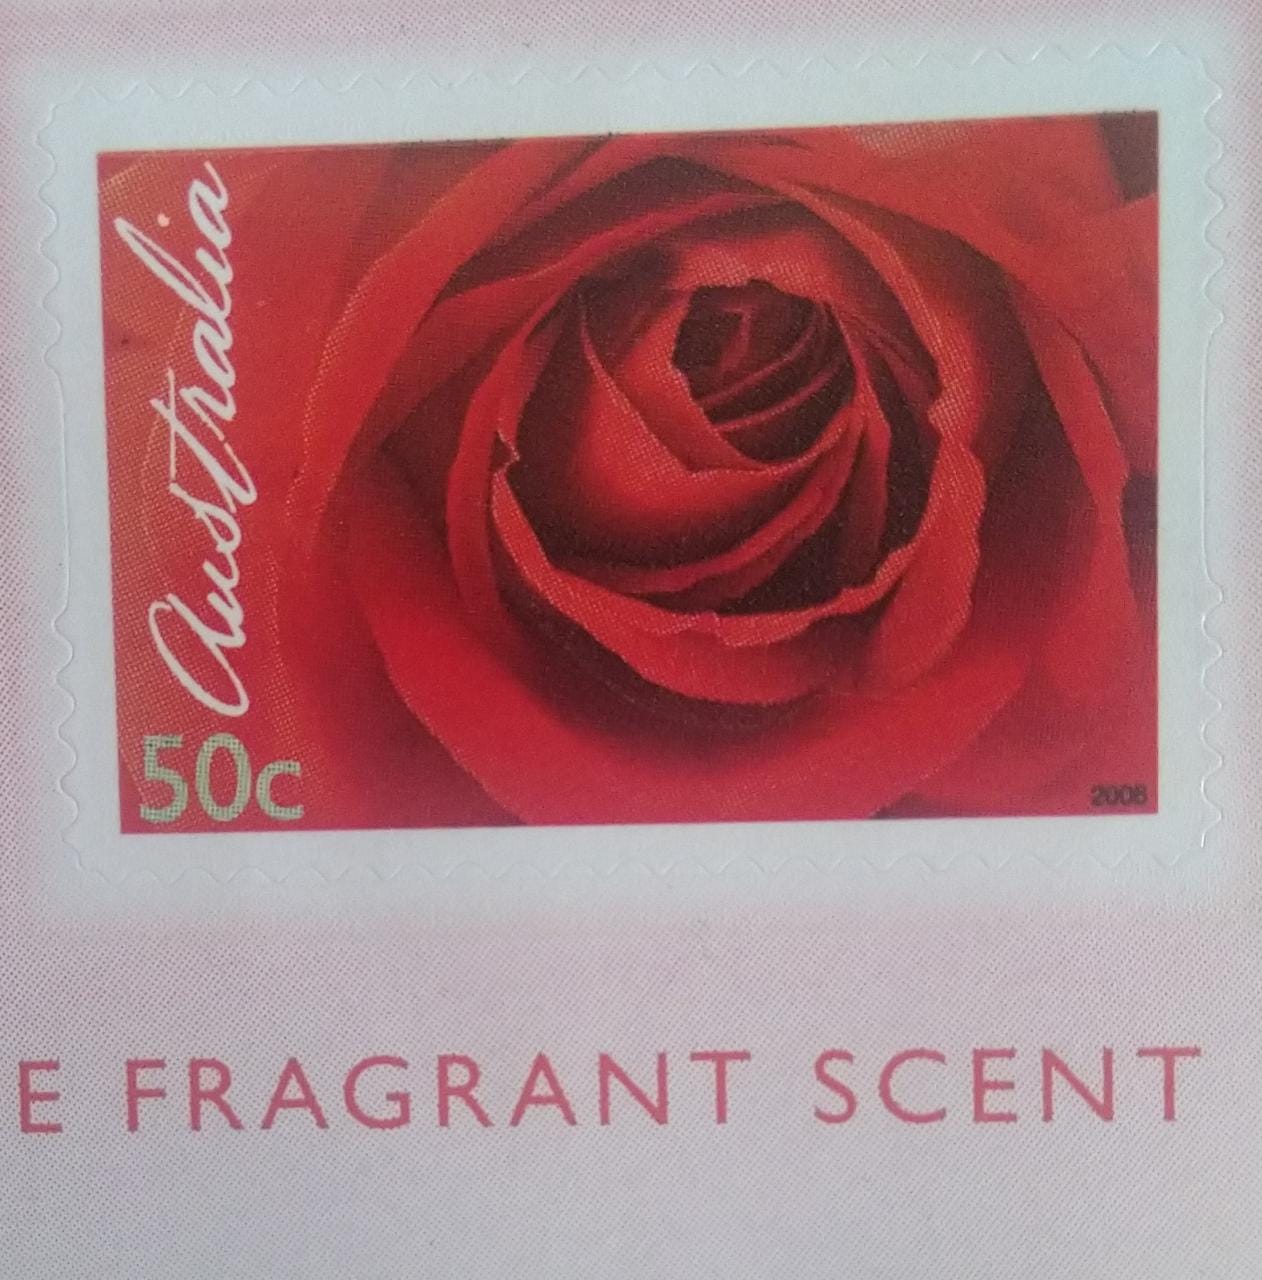 Australia-Scented  Rose stamps from Australia.